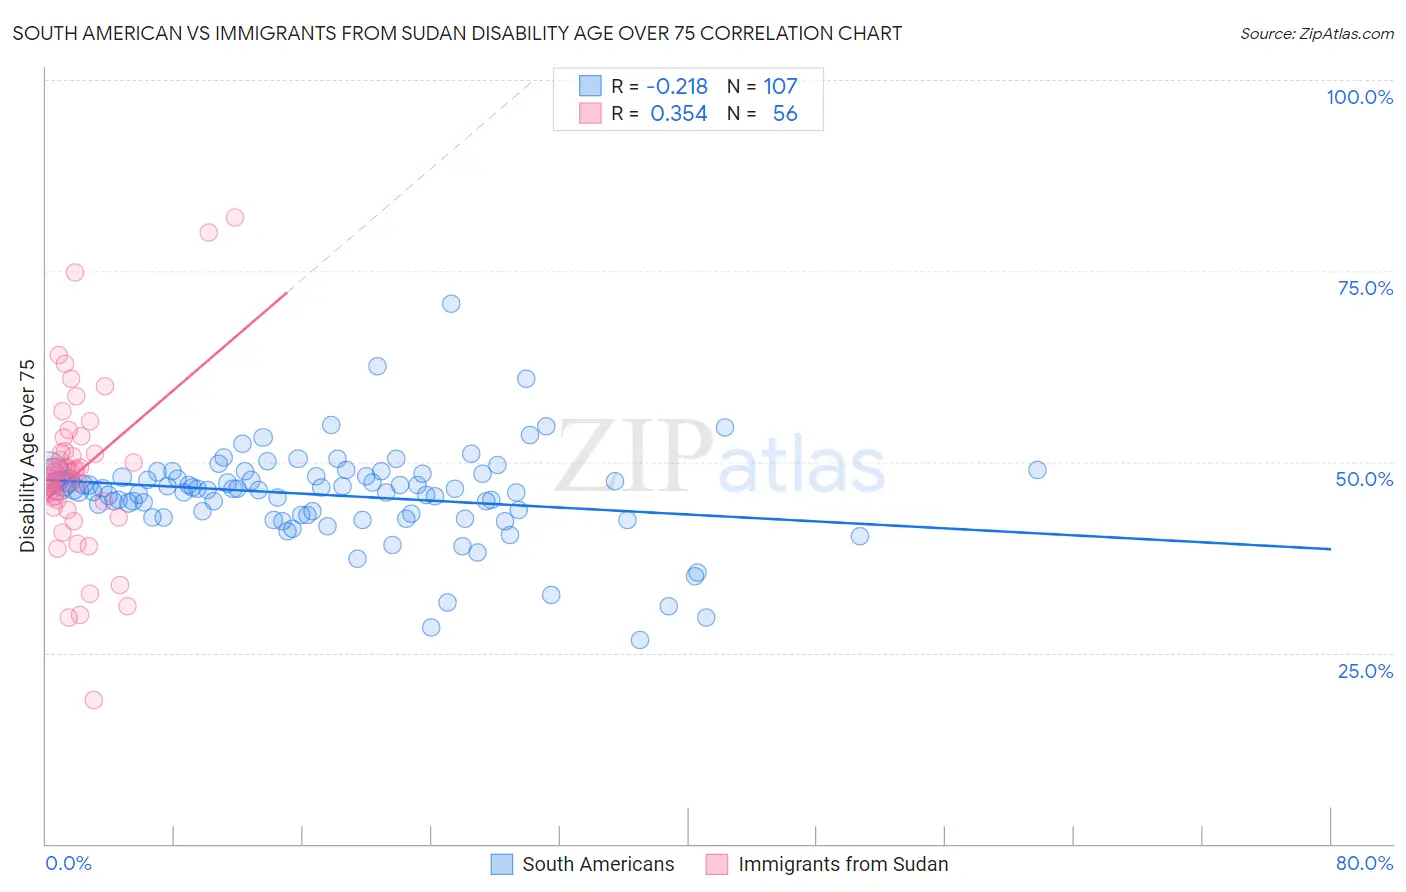 South American vs Immigrants from Sudan Disability Age Over 75